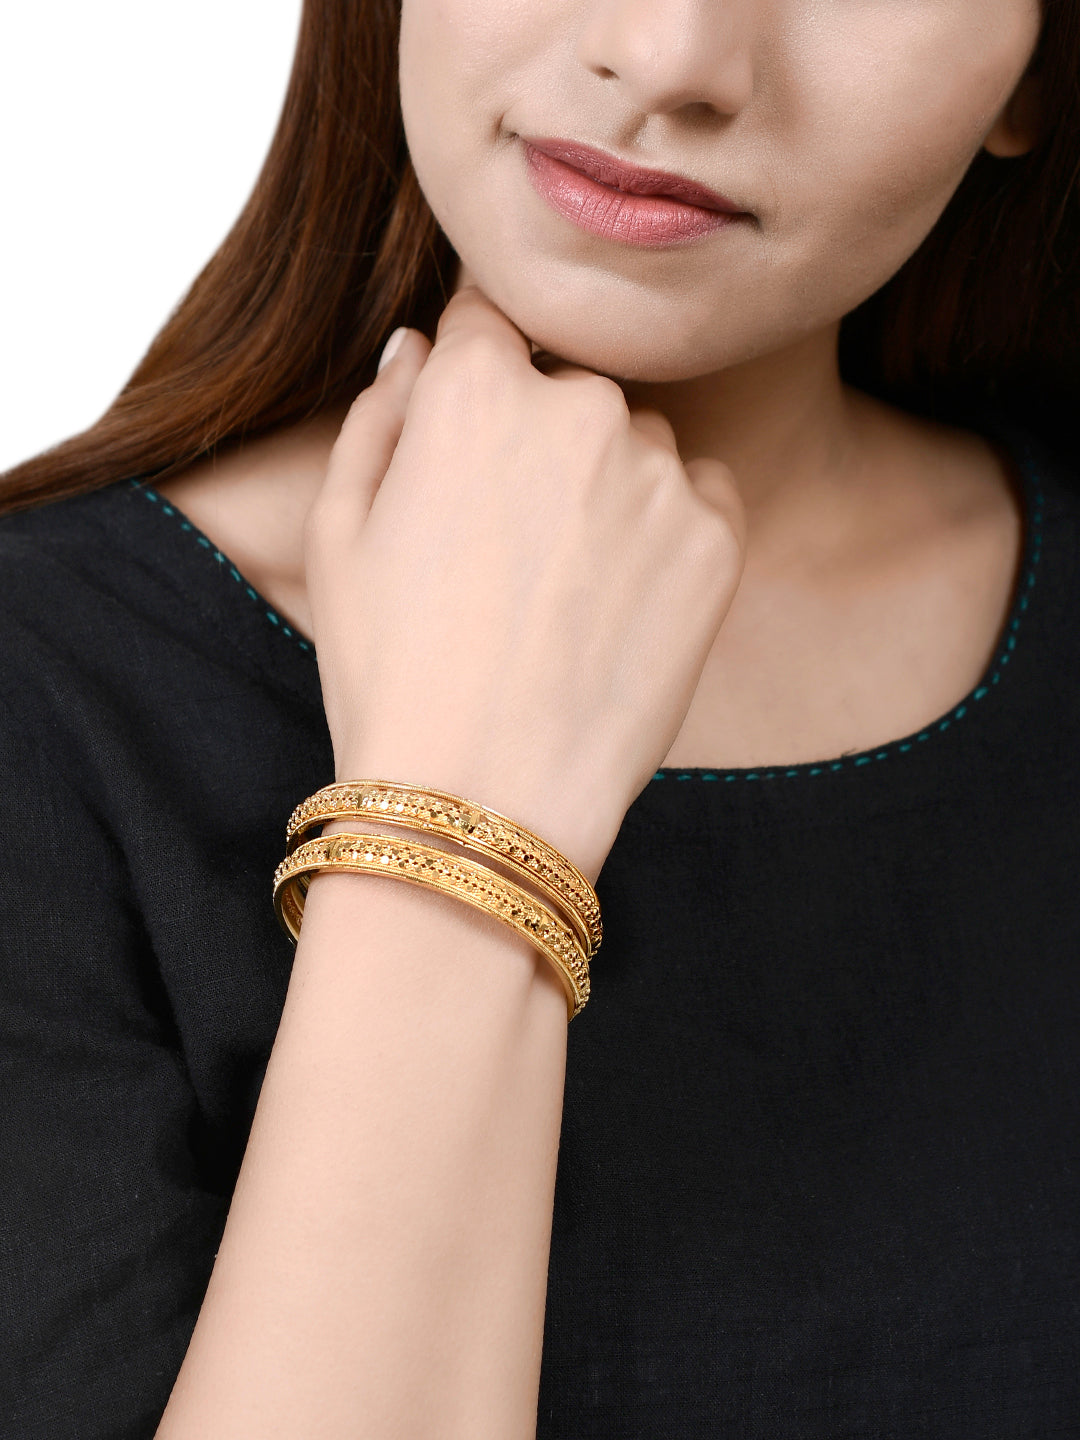 Set Of 4 Gold Plated Metal Bangles For Women